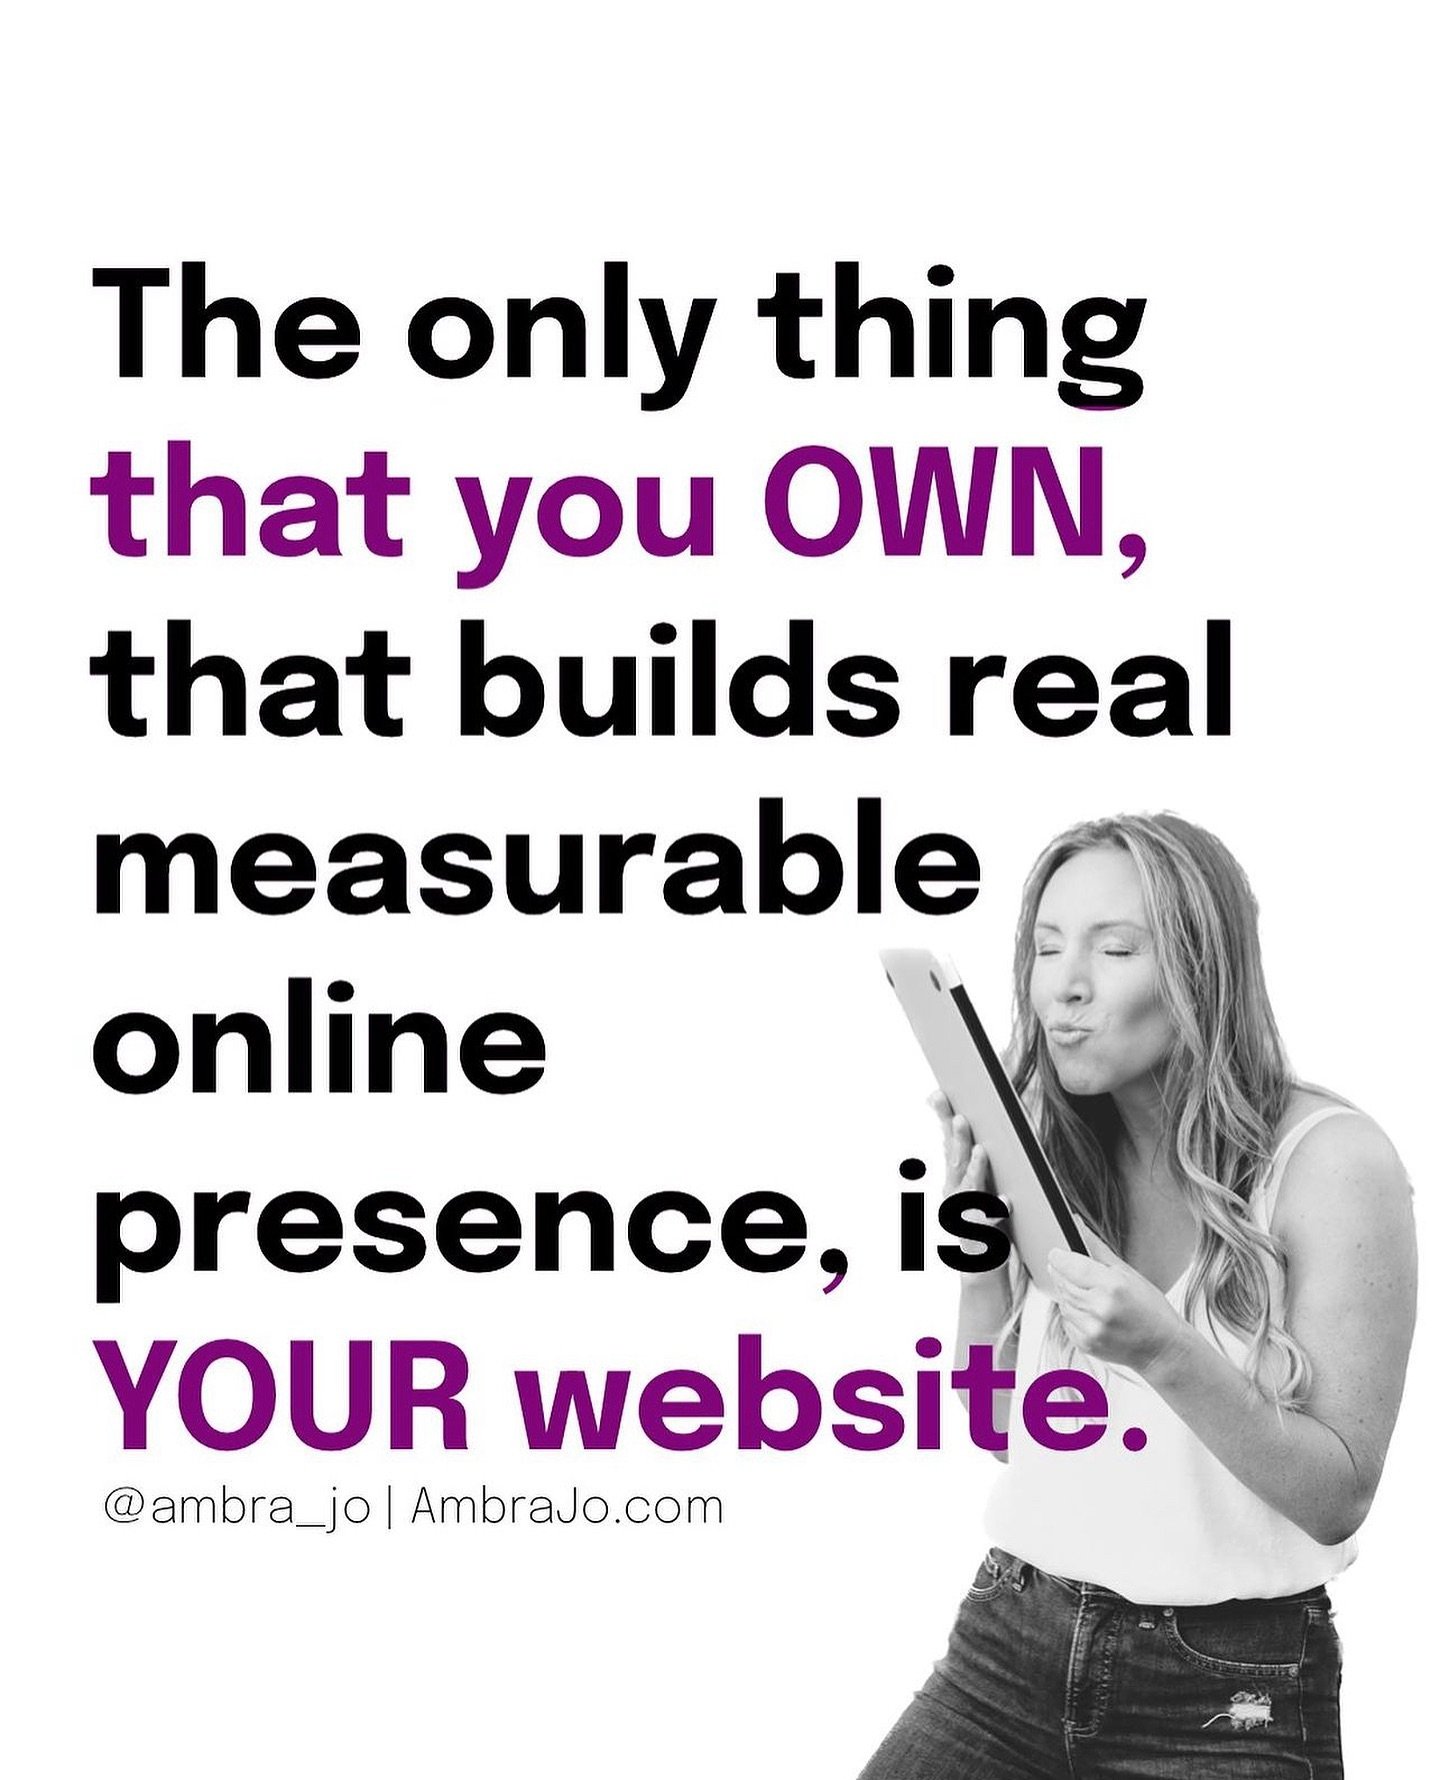 Not linktree, not IG, not kajabi, not kartra, not etsy, not clickfunnels. 

These are online TOOLS they are NOT your website. They are not building you online presence that you OWN. 

Why does that matter? 

Because you have no recourse or authority 